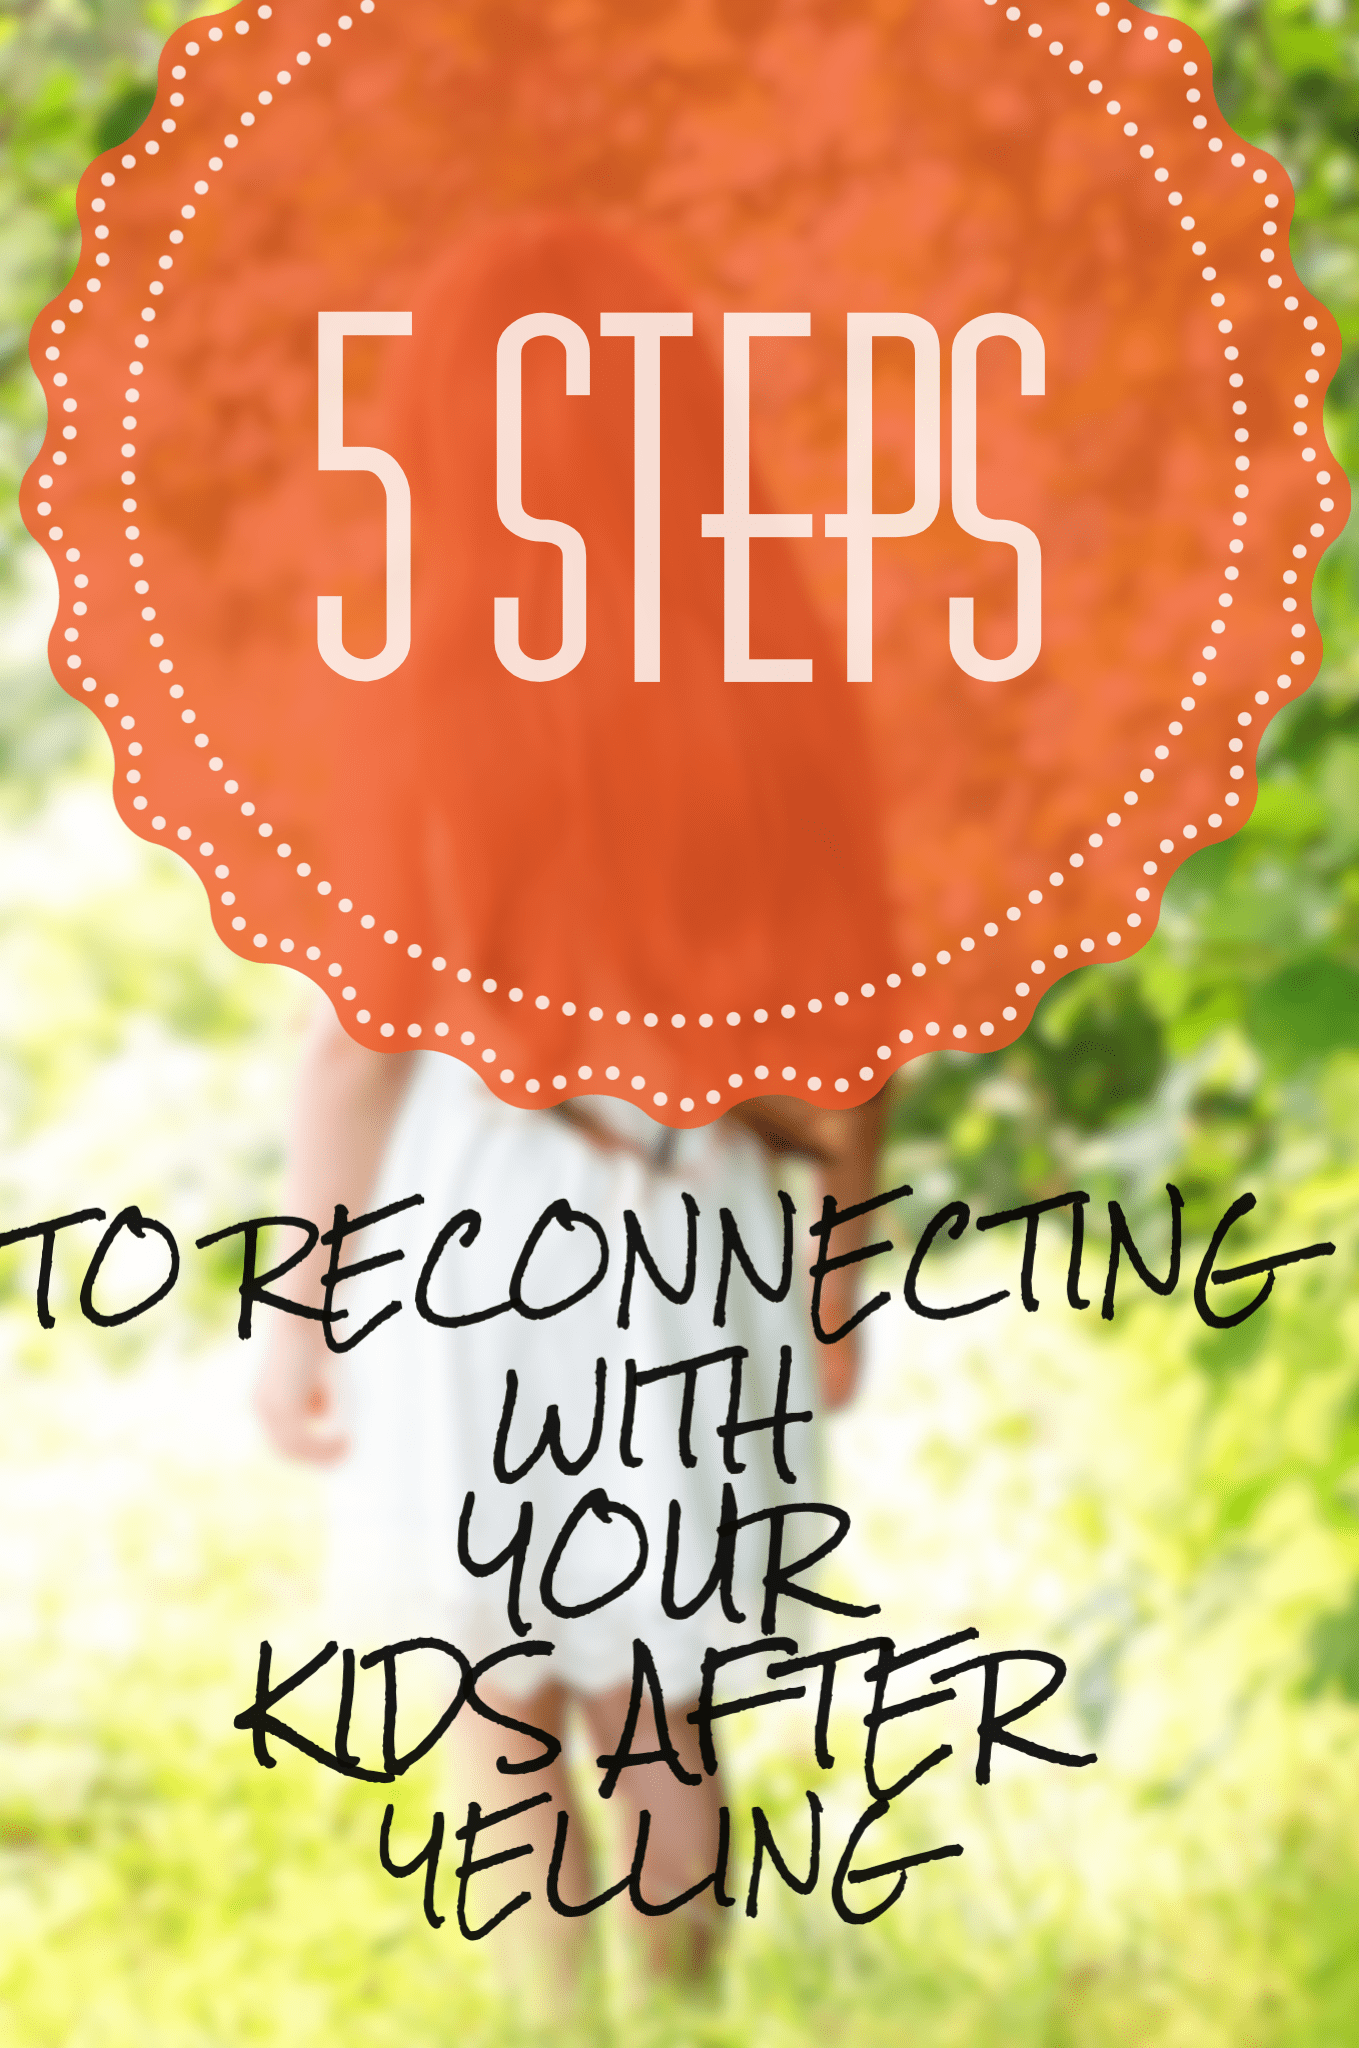 Do you find yourself yelling at your kids? Parenting wears on the strongest of parents, we lose our patience and we yell. Here are 5 stepes to reconnecting with your child AFTER you yell. #gentleparenting